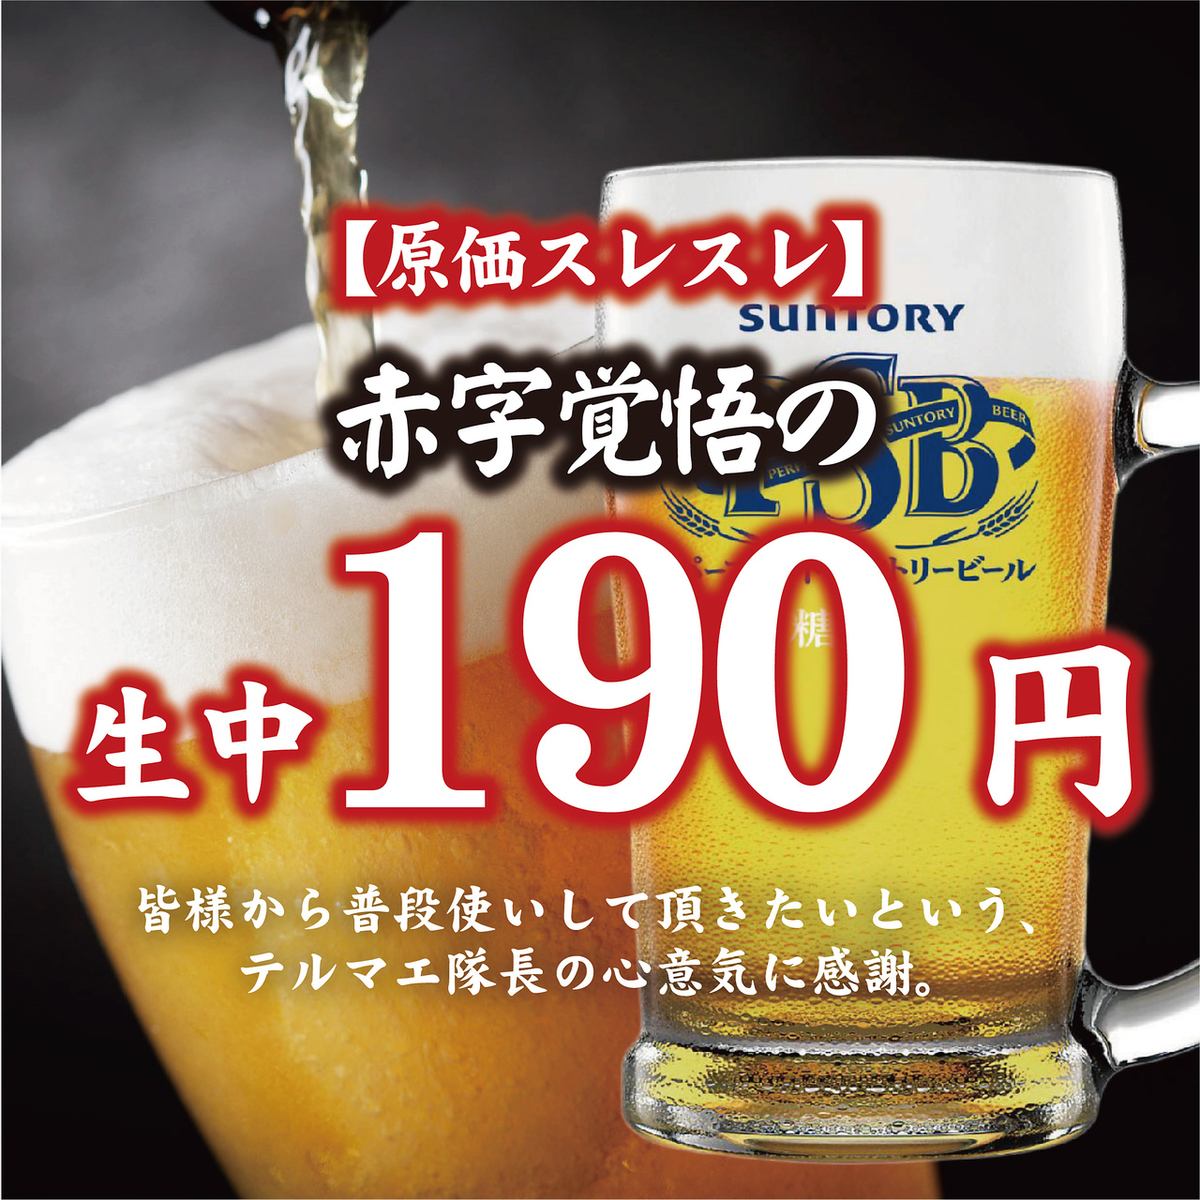 Draft beer is 190 yen, so you're prepared for a loss! Great return for cheap and fun♪